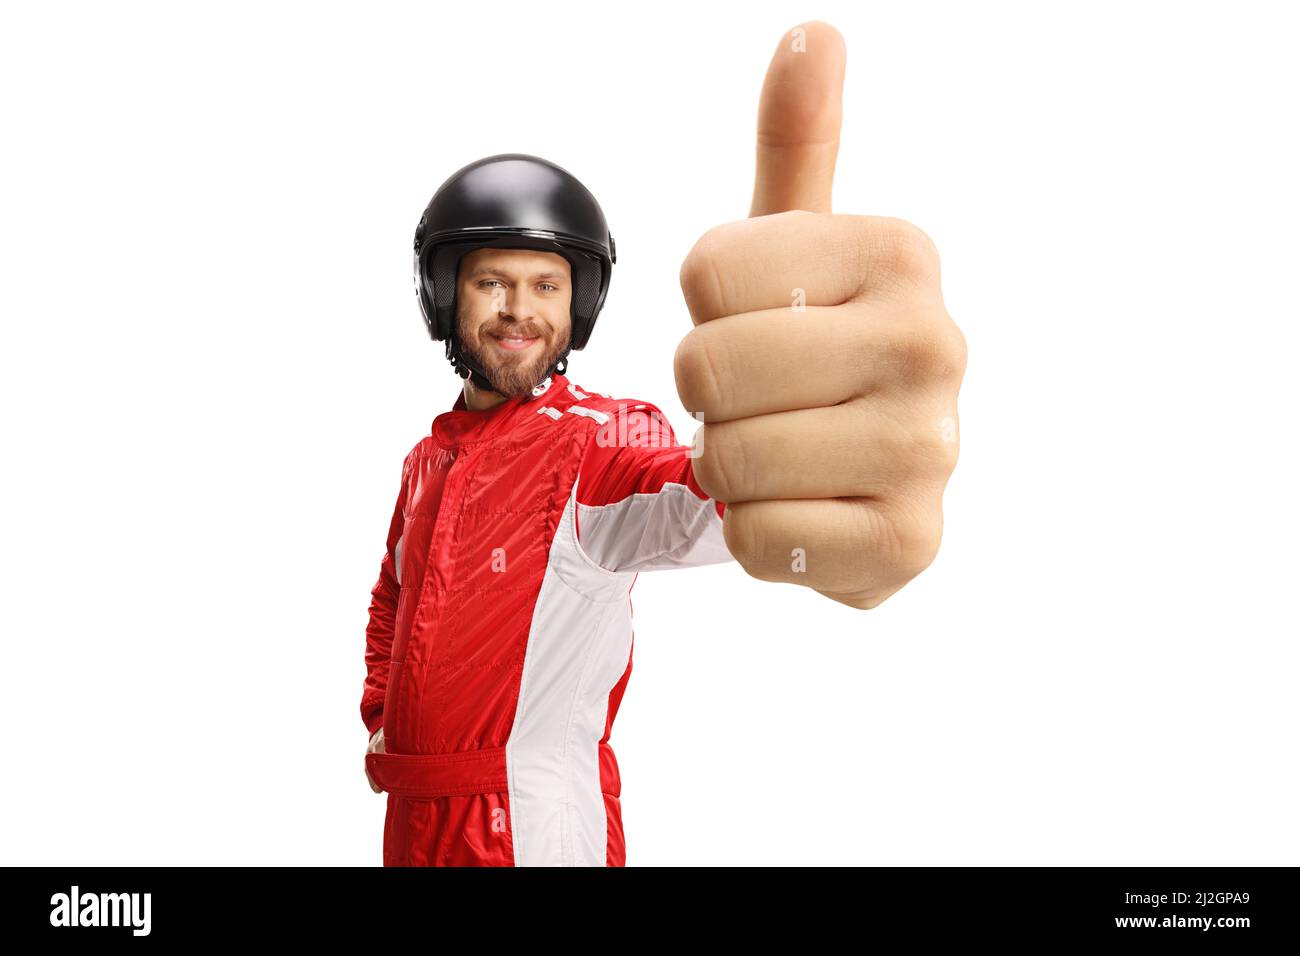 Driver in a red suit and helmet gesturing thumbs up isolated on white background Stock Photo